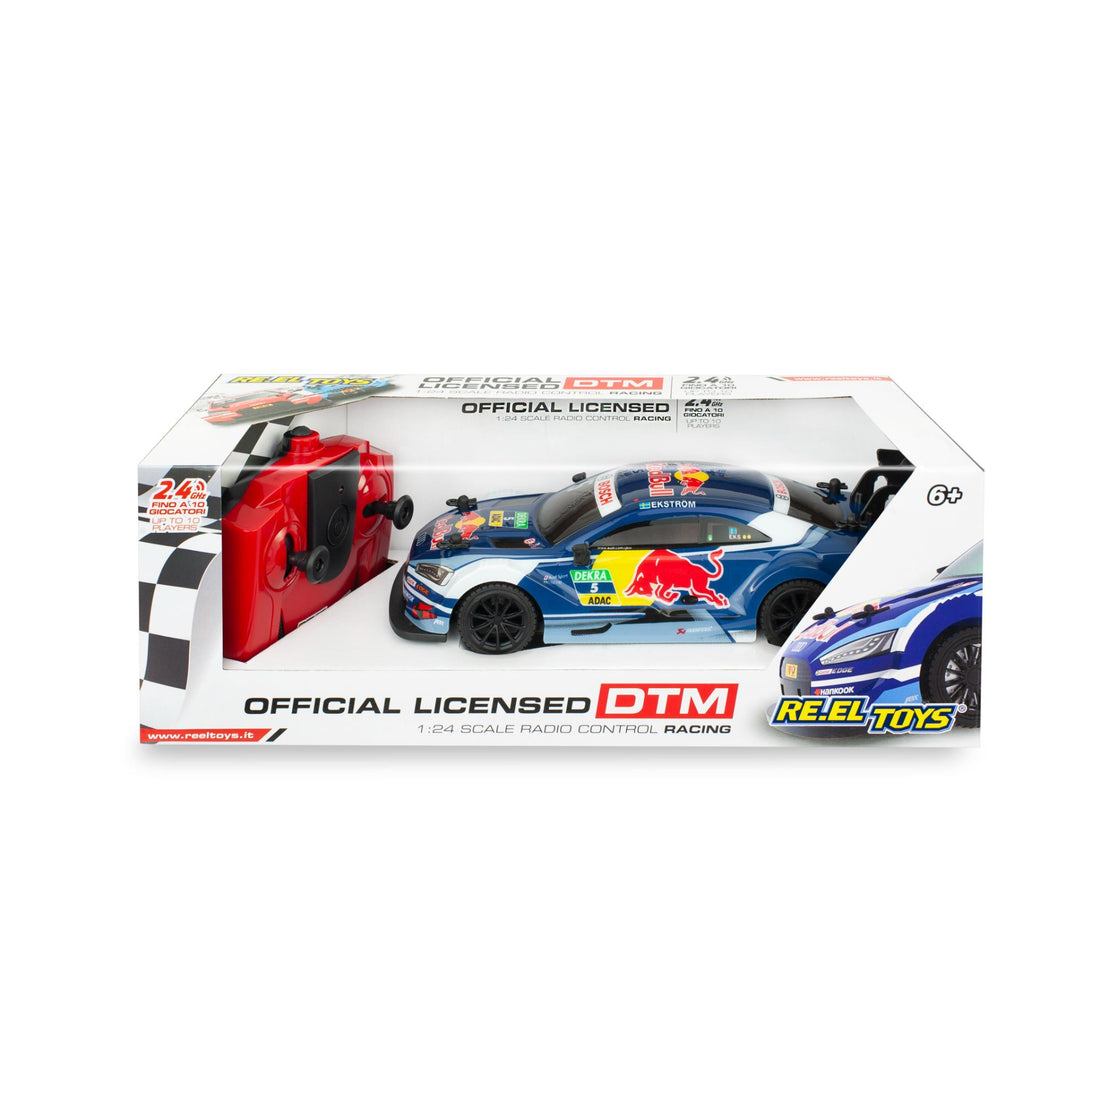 AUDI RS5 DTM 1:24 Scale: Rc 2,4 GHz - 2 assorted colors